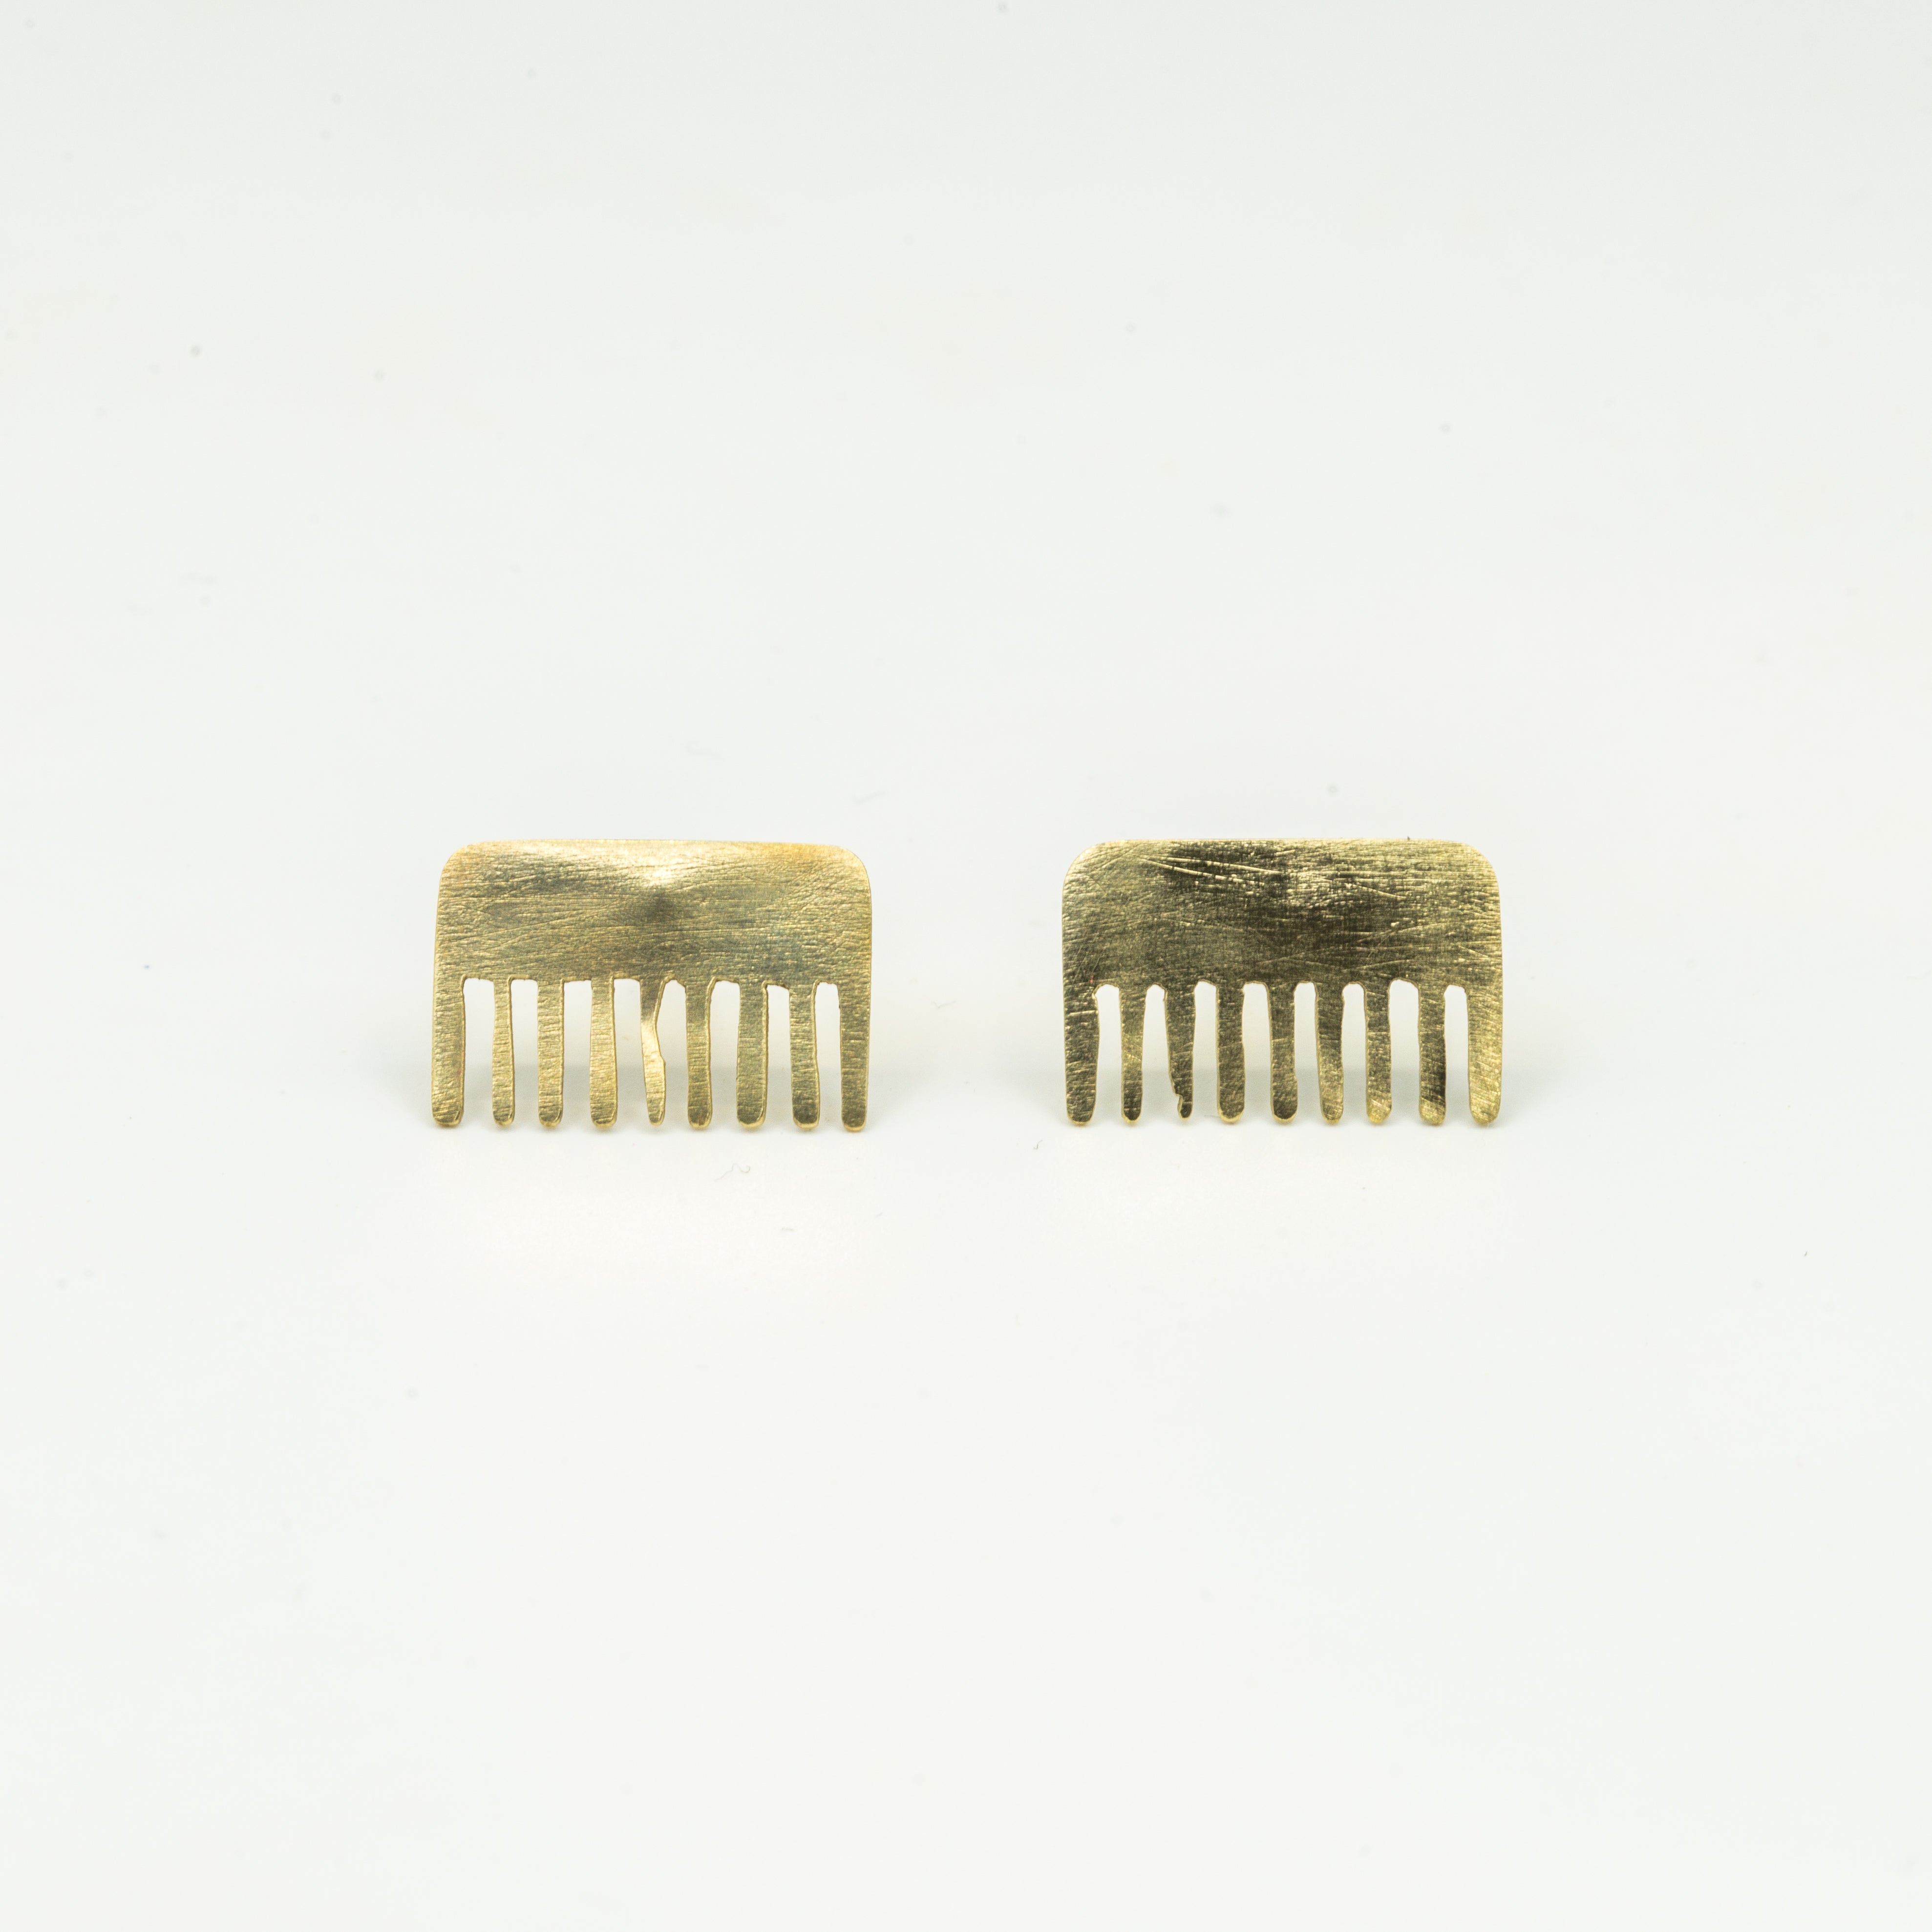 brass comb shaped mini stud earrings on white background